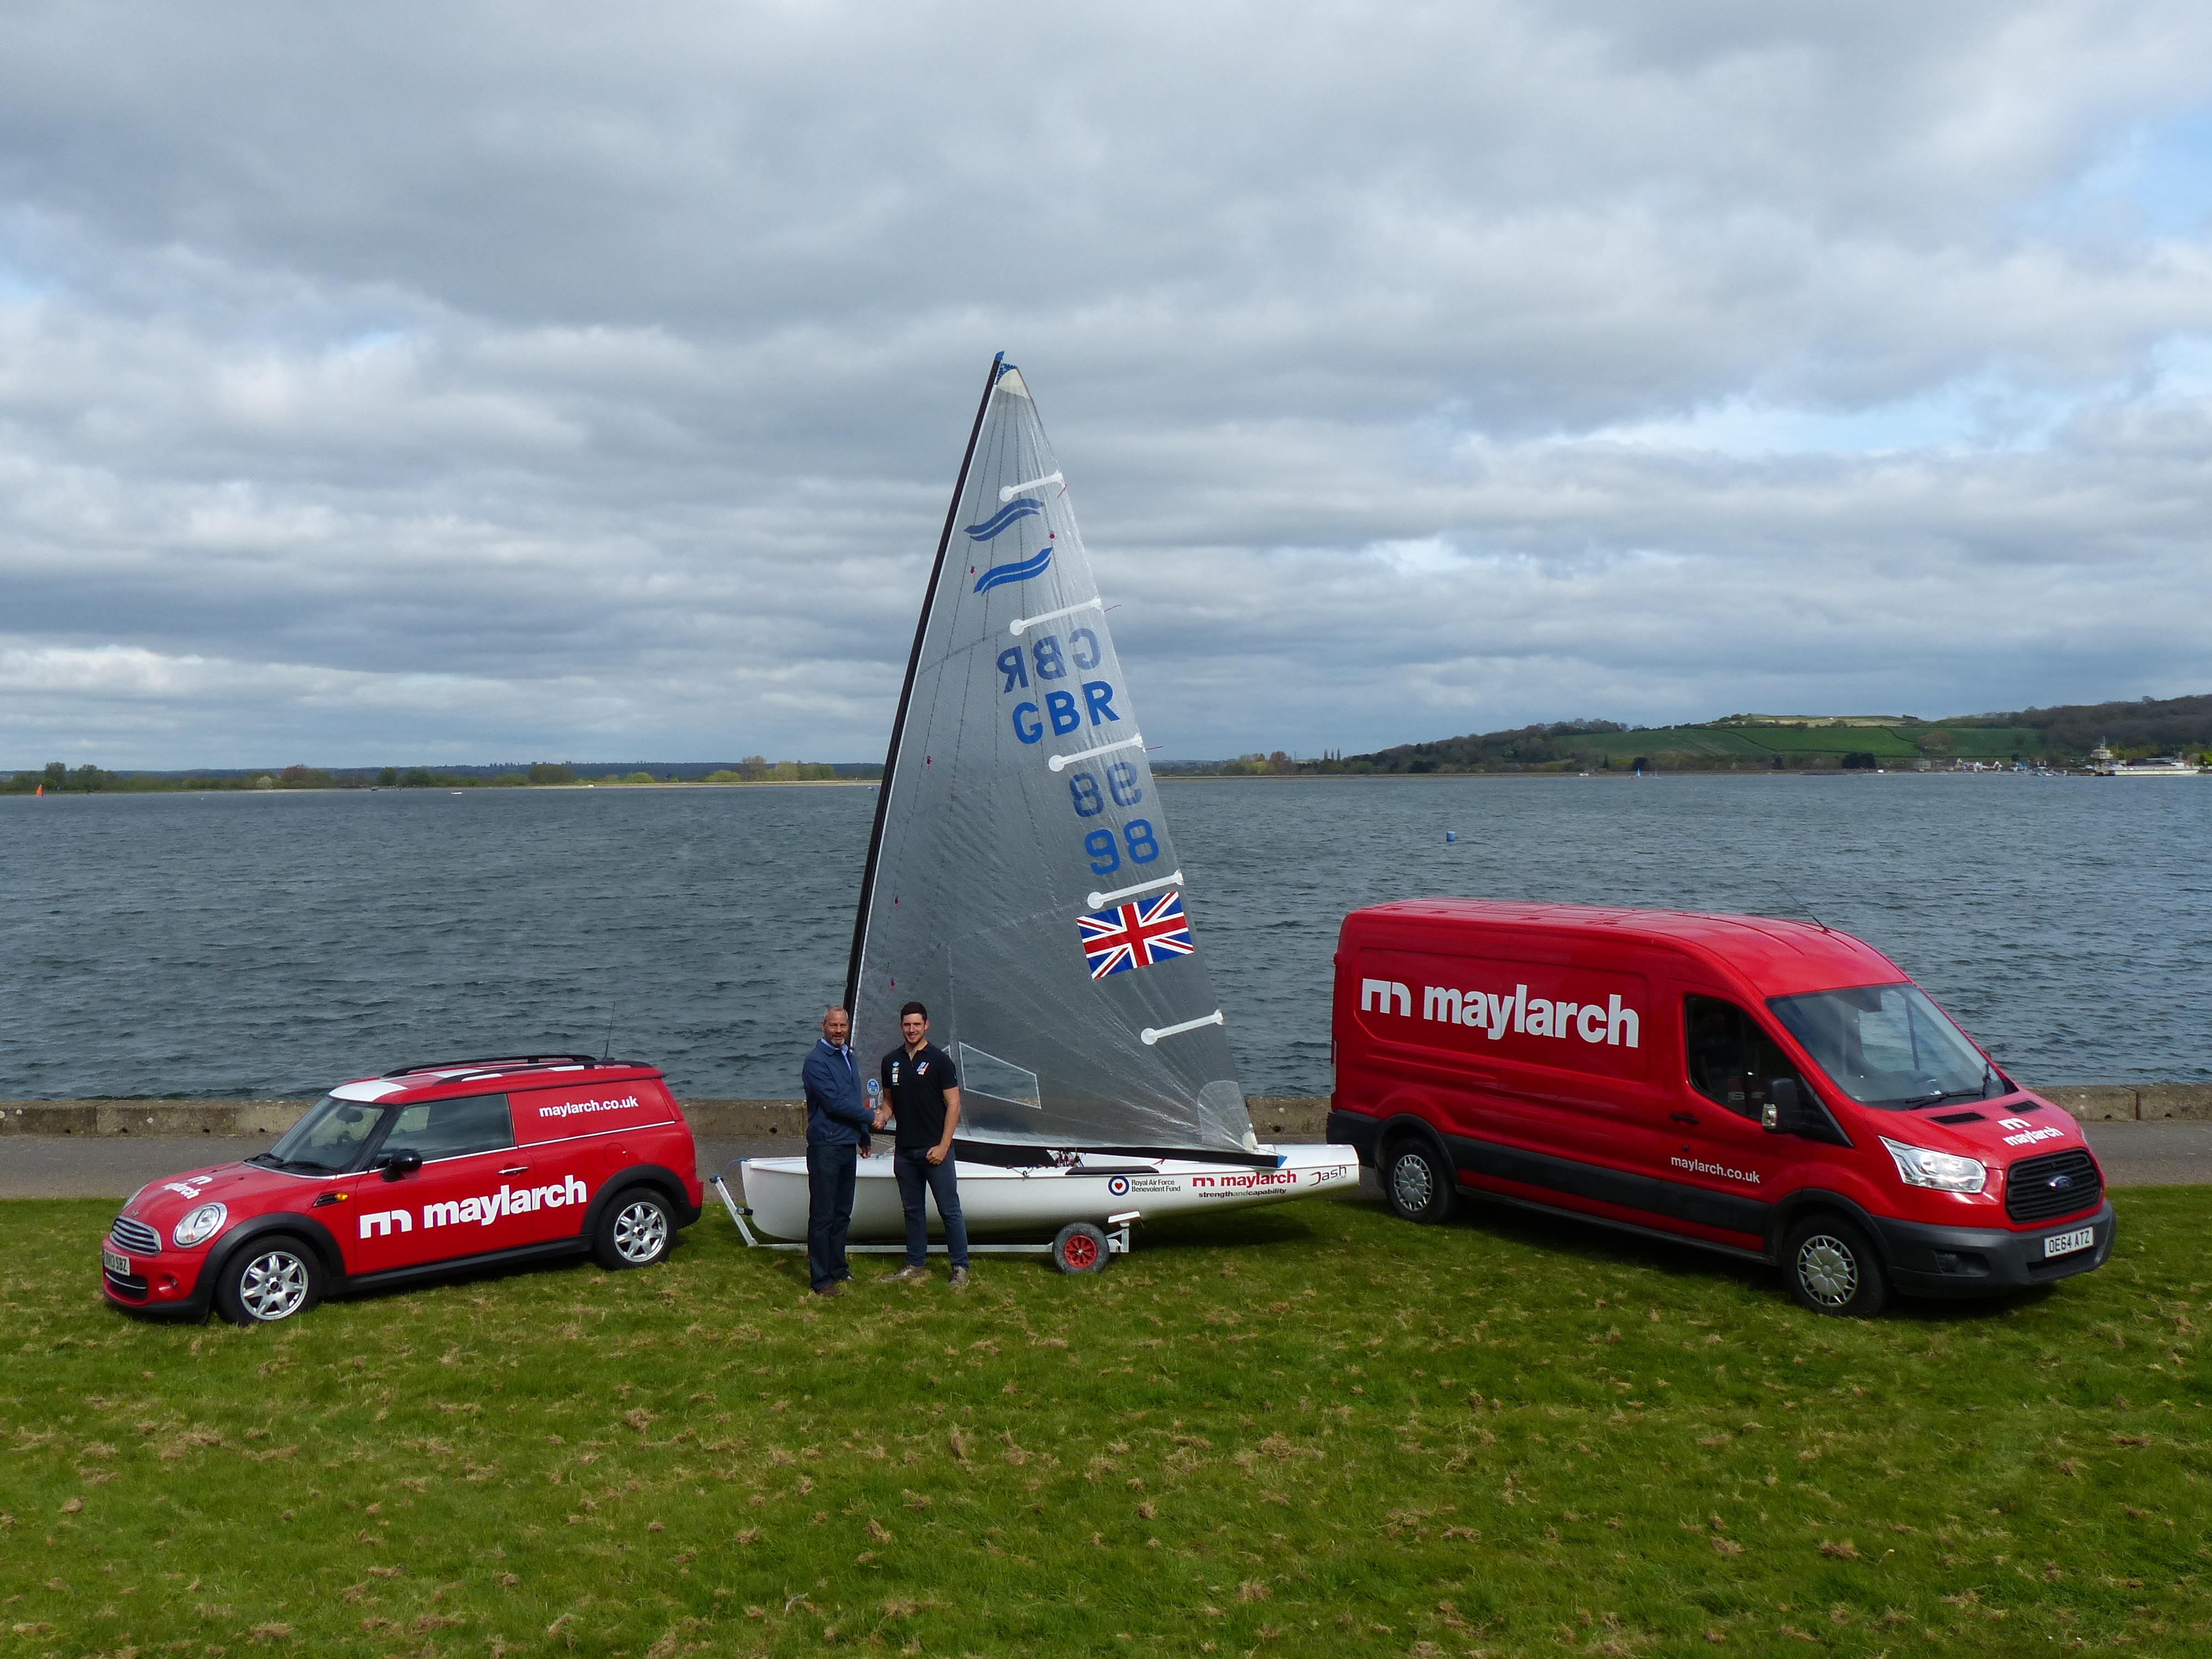 Maylarch Extends Sponsorship Deal with U23 Sailor Cameron Tweedle